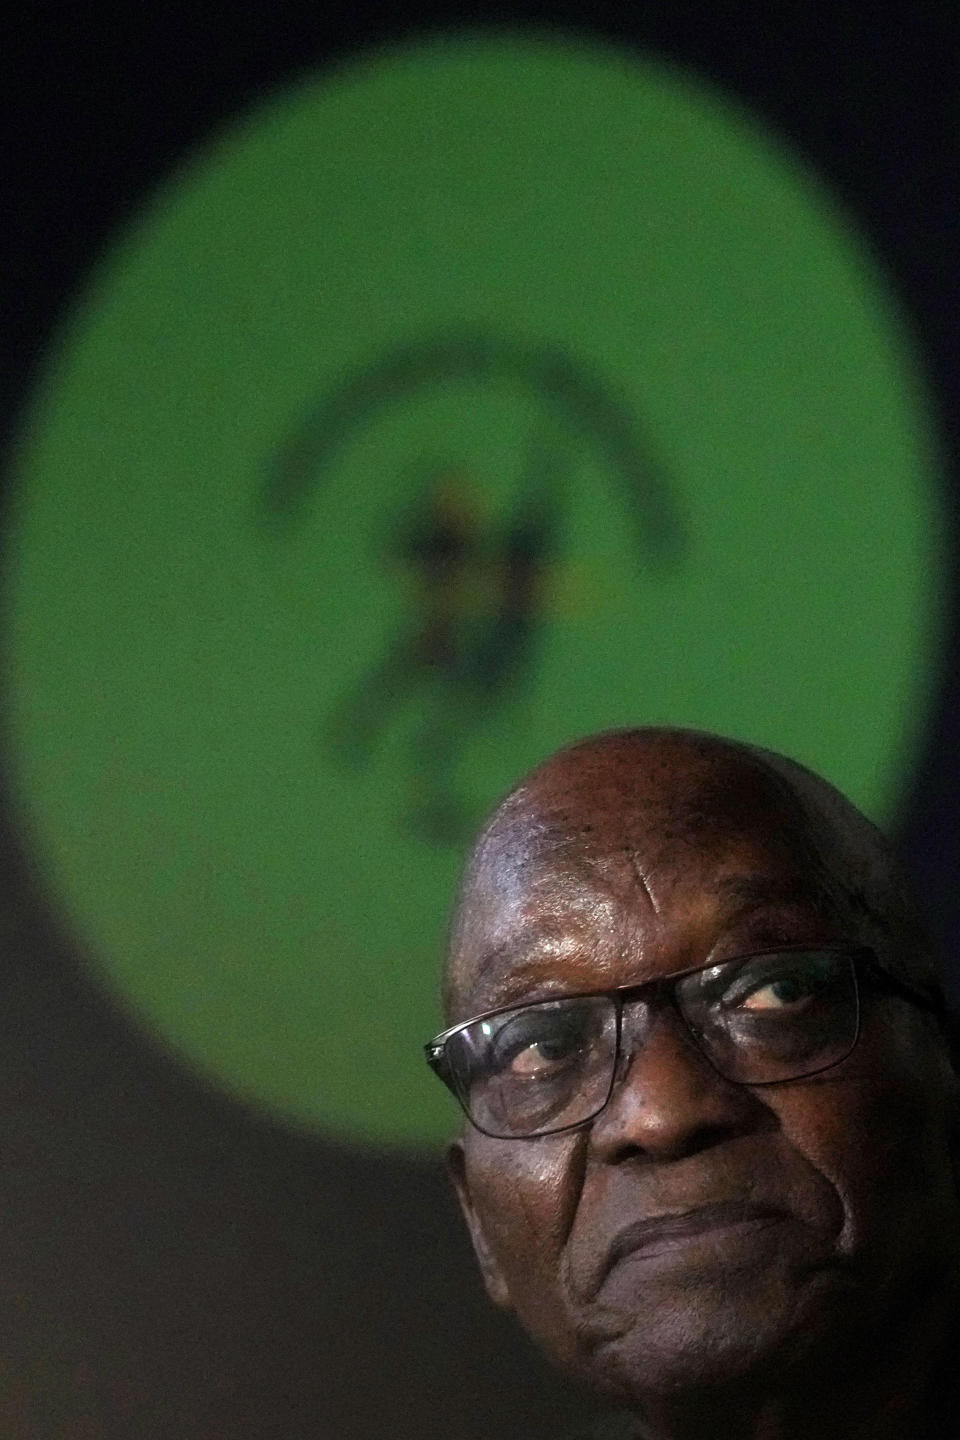 Former South African President Jacob Zuma looks on during a press conference in Soweto, South Africa, Saturday, Dec. 16, 2023. Zuma has denounced his ruling African National Congress party and announced that he will vote for a newly-formed political formation in the country's general election next year. (AP Photo/Themba Hadebe)